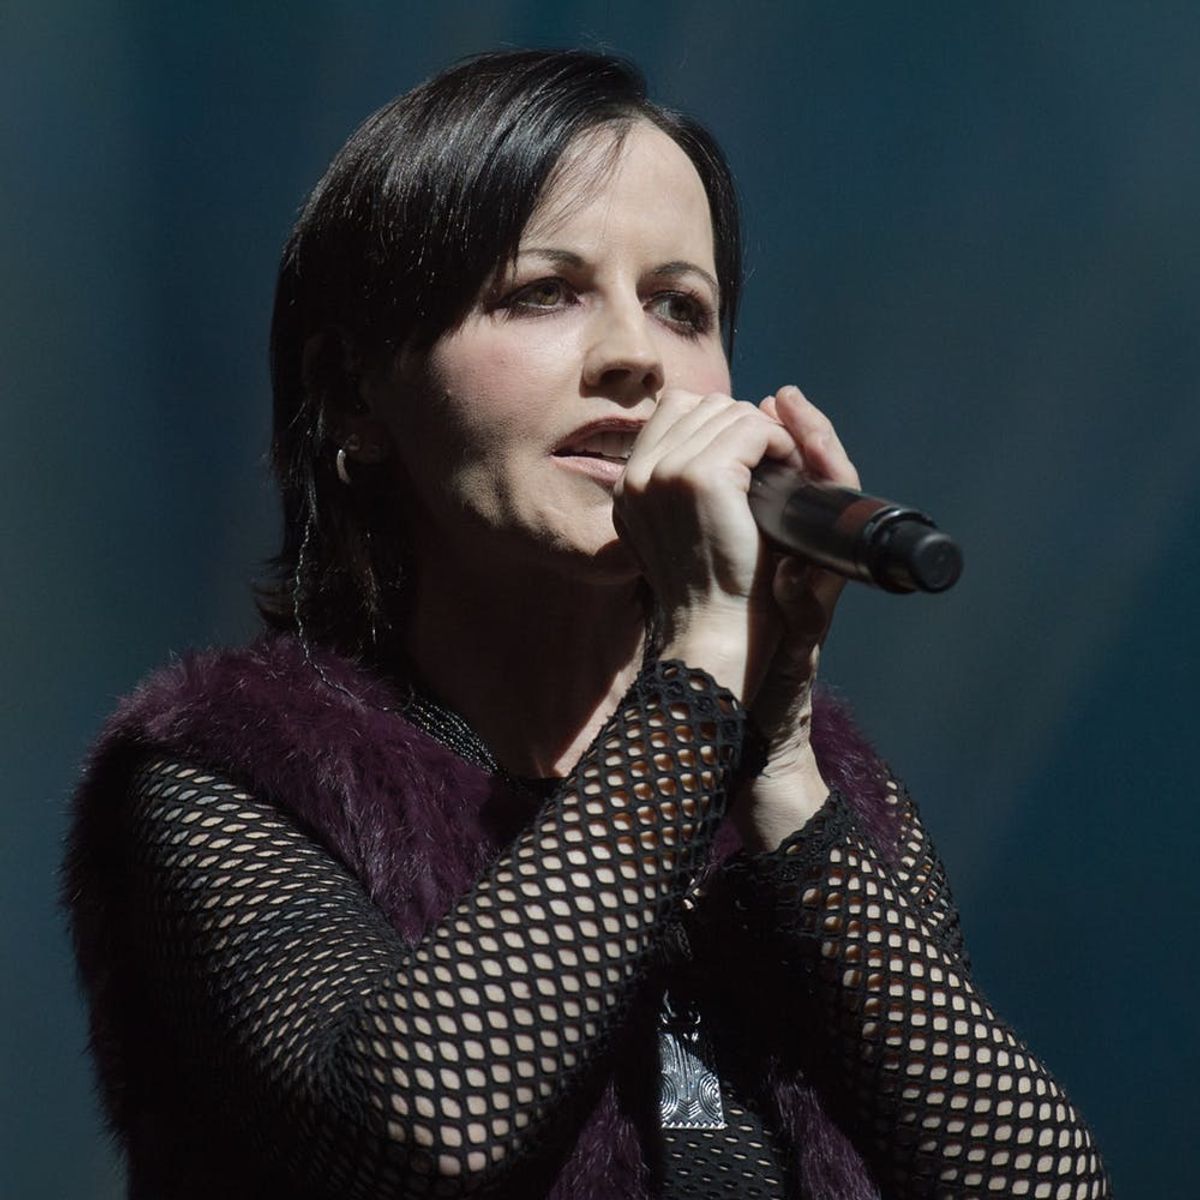 Dolores O’Riordan, Lead Singer of The Cranberries, Has Died at Age 46